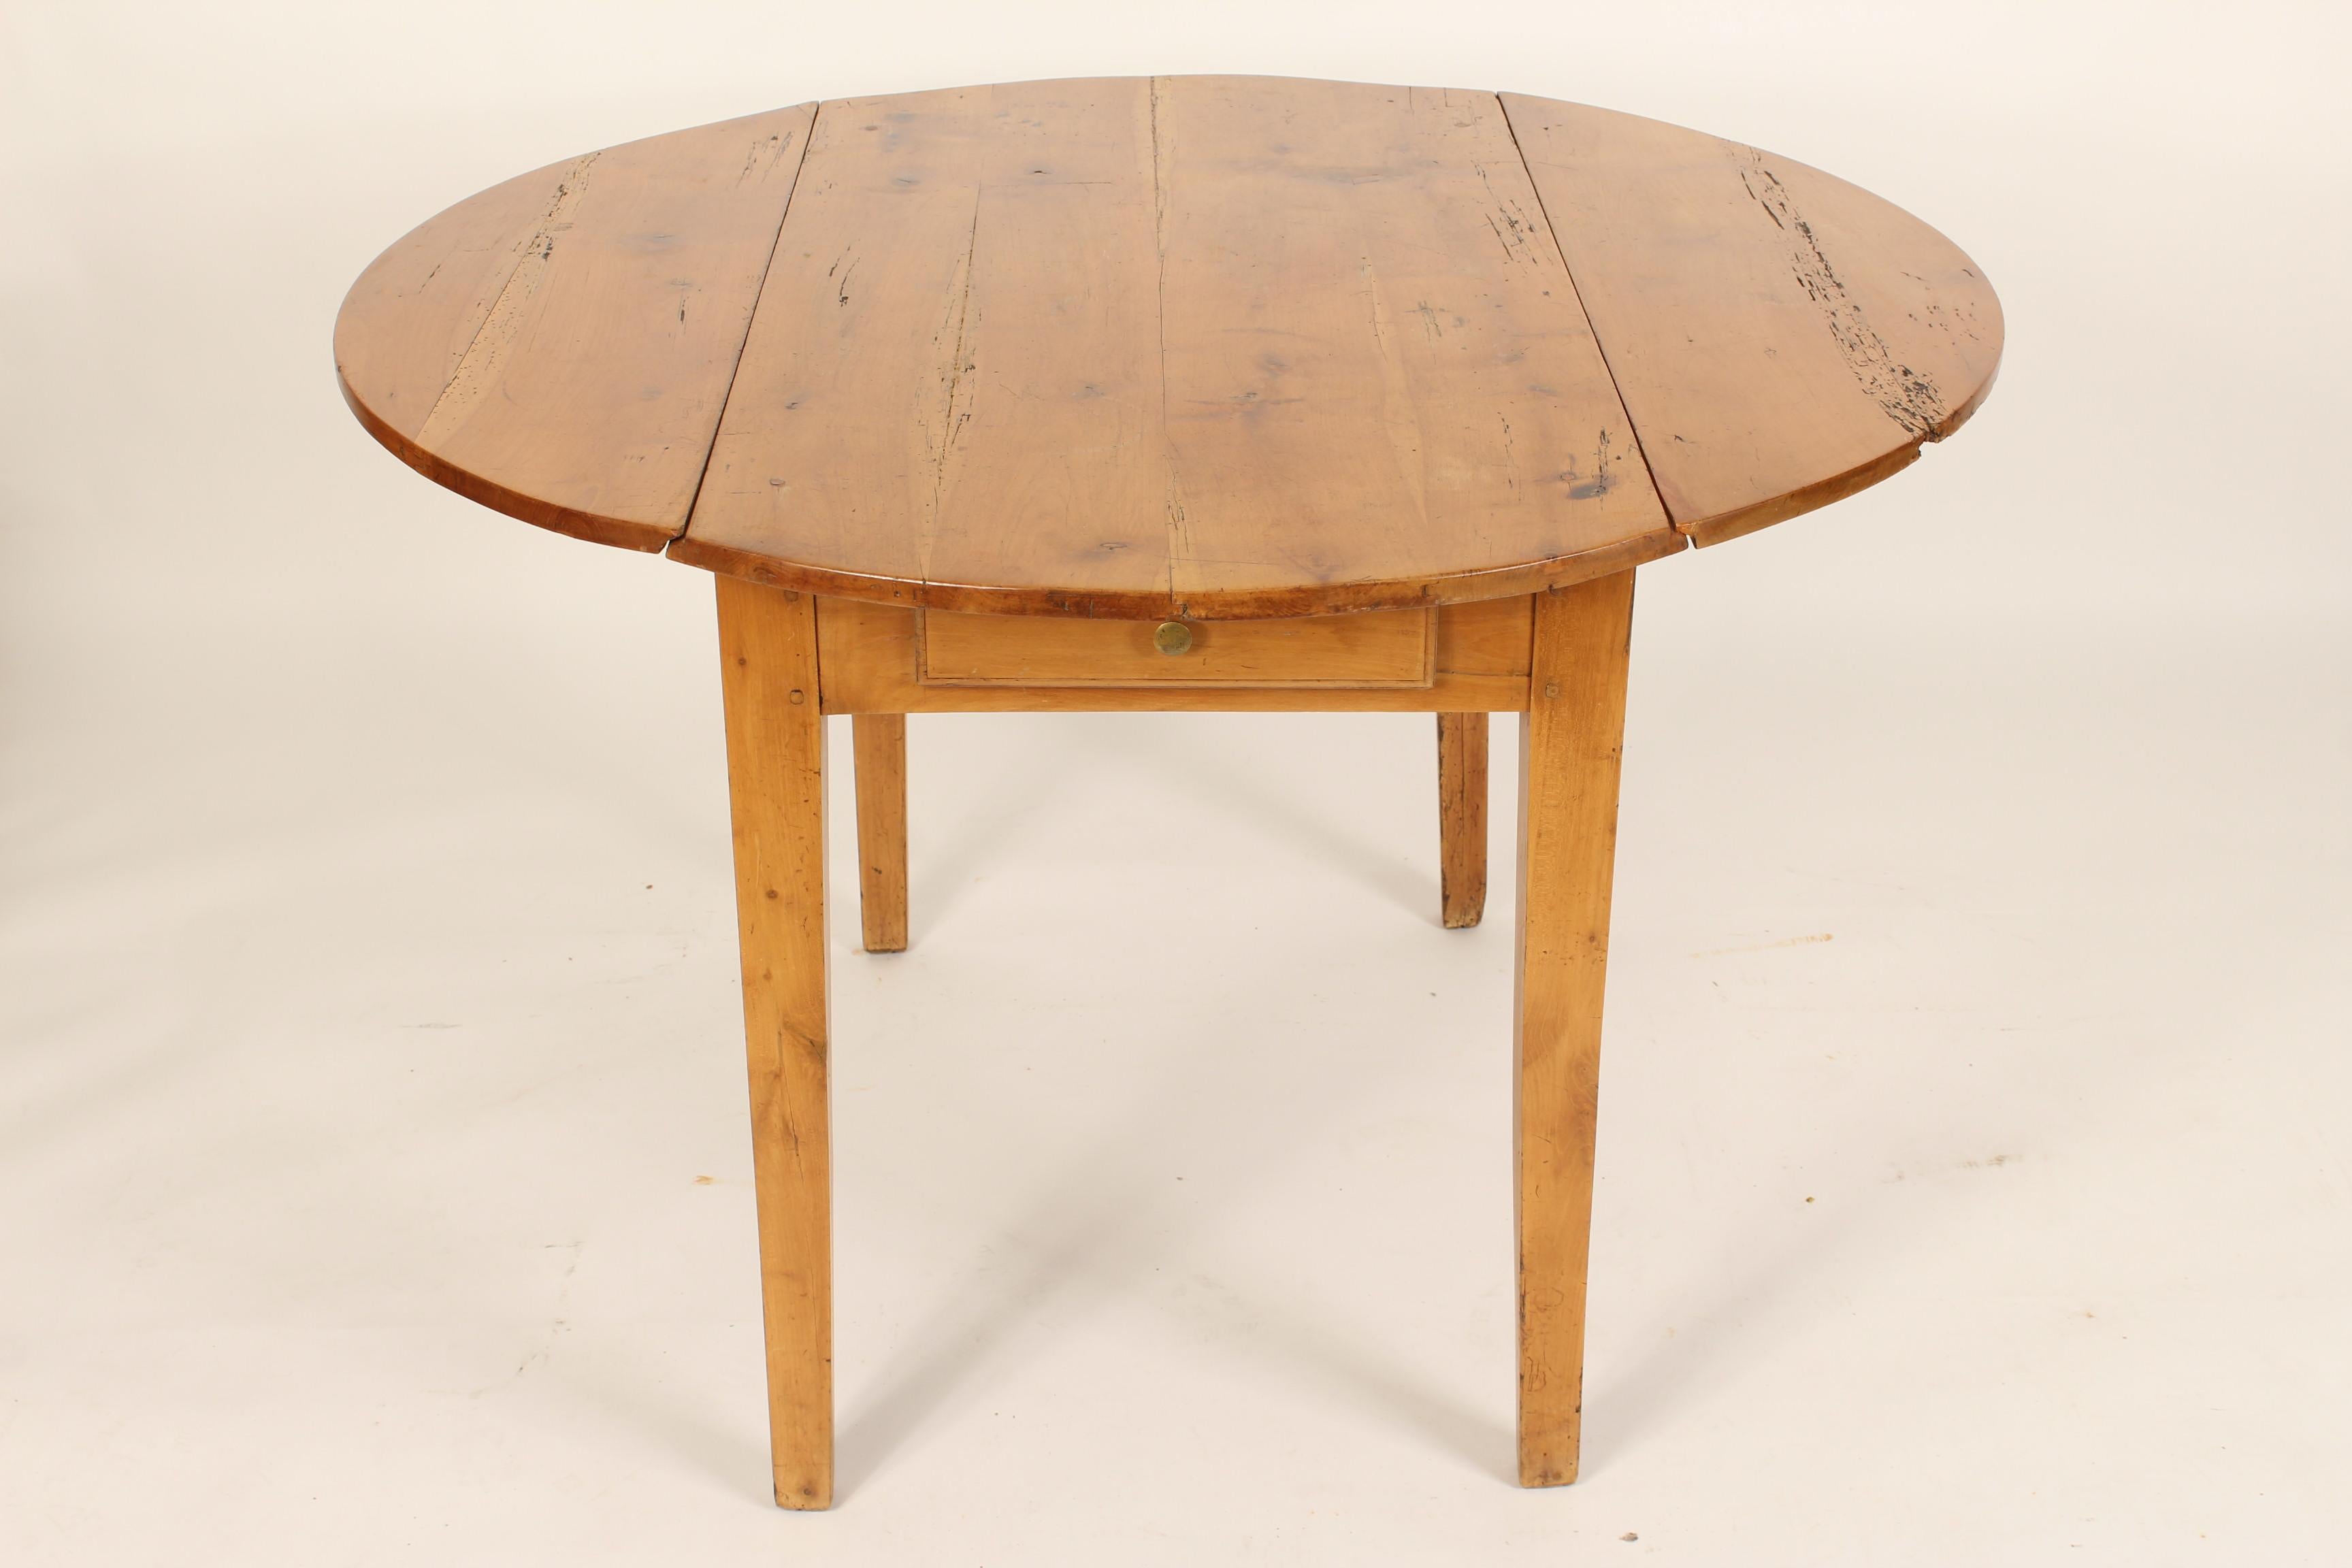 Antique Directoire style pine drop-leaf table, 19th century. Nice color and finish. This is a very versatile table that could be used as a small dining table, games table, occasional table or a sofa table. Diameter when both leaves are raised 44.5